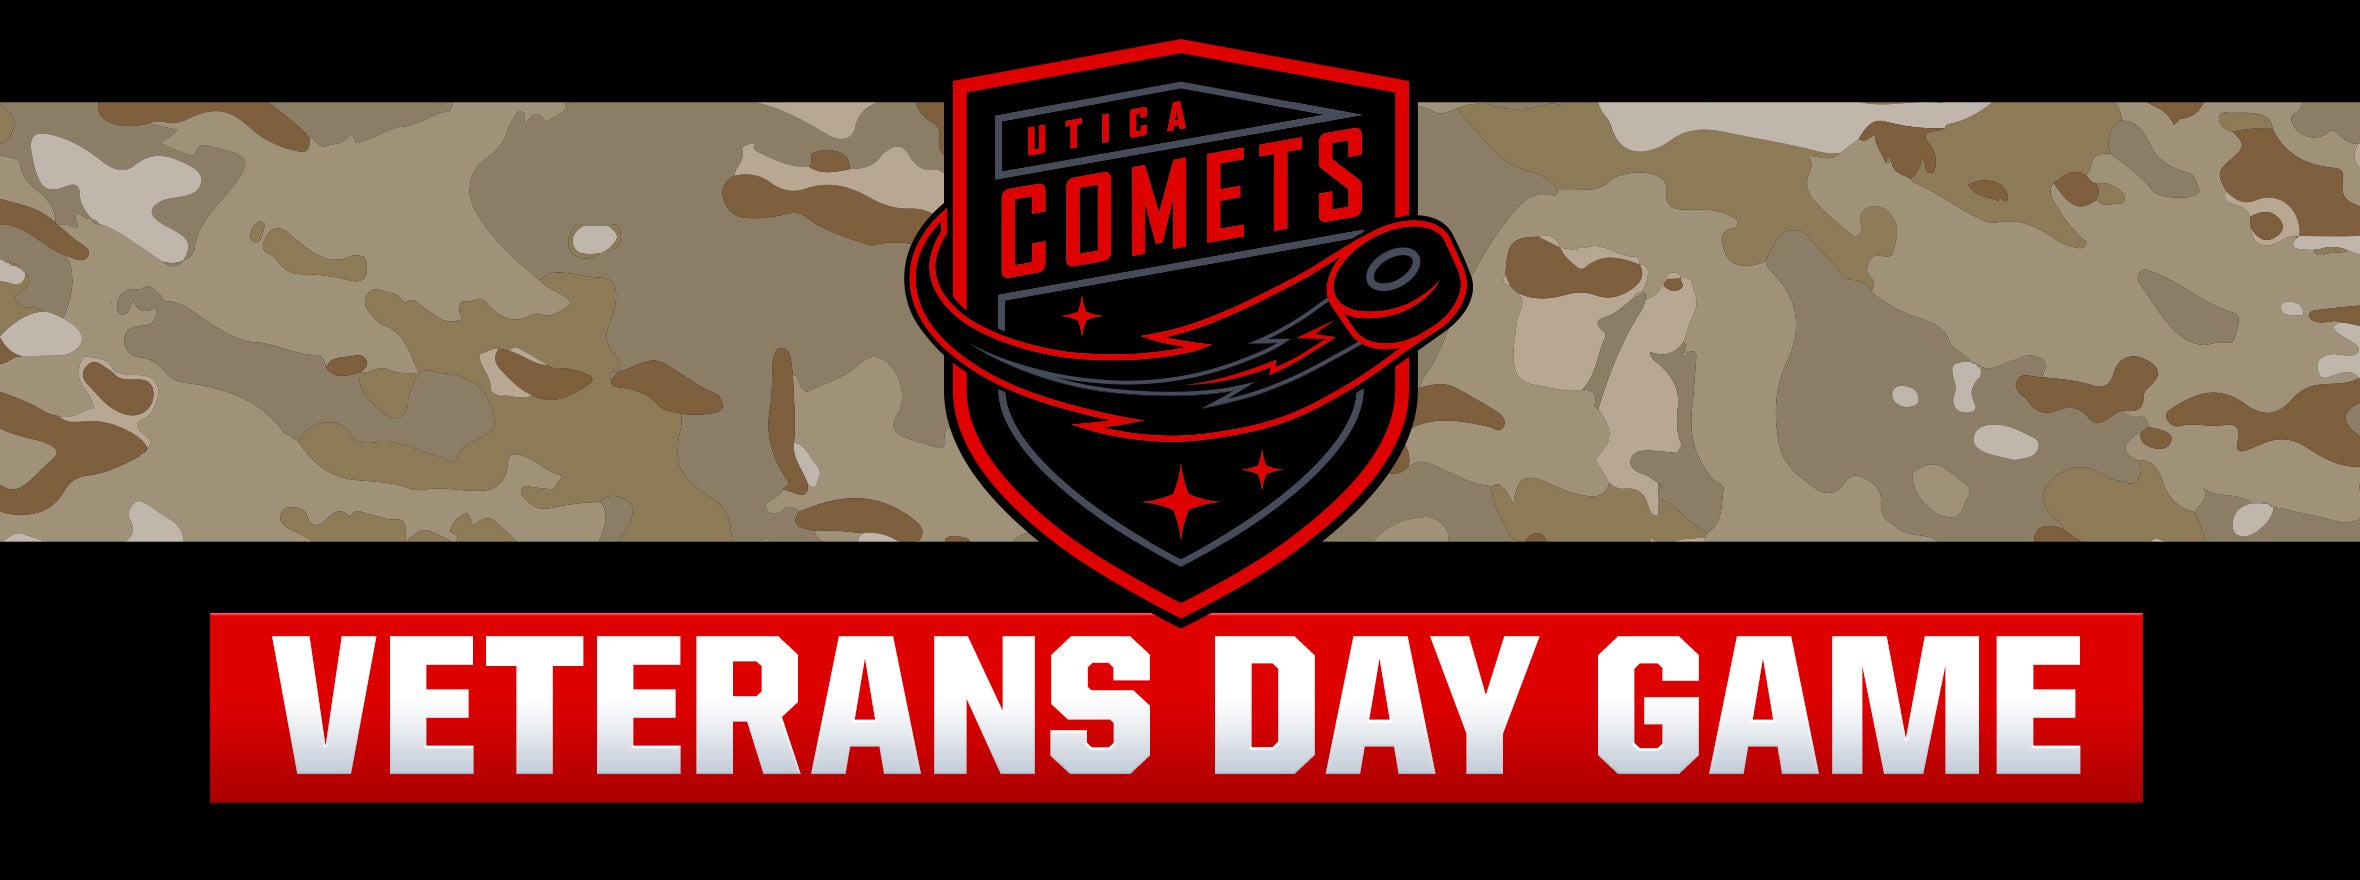 COMETS ANNOUNCE DETAILS OF MILITARY APPRECIATION GAME